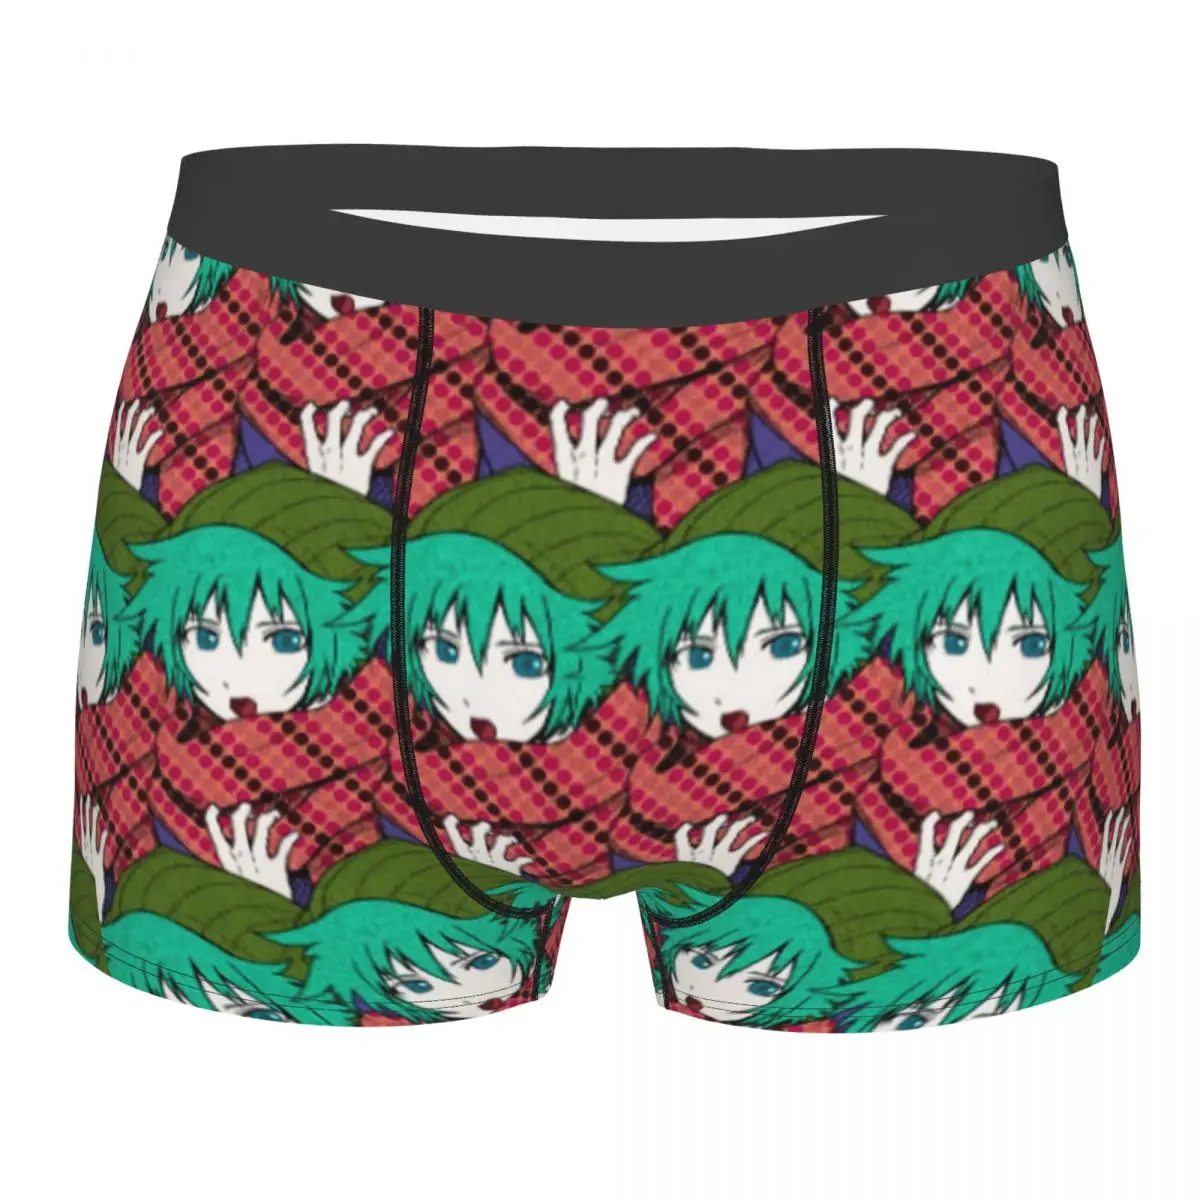 YTTD-Shin Tsukimi Your Turn To Die Boxer pour Homme, Shorts, Culottes,  Sous-Vêtements Respirants, Jeu Anime, Caleçons Grande Taille, Mode Masculine